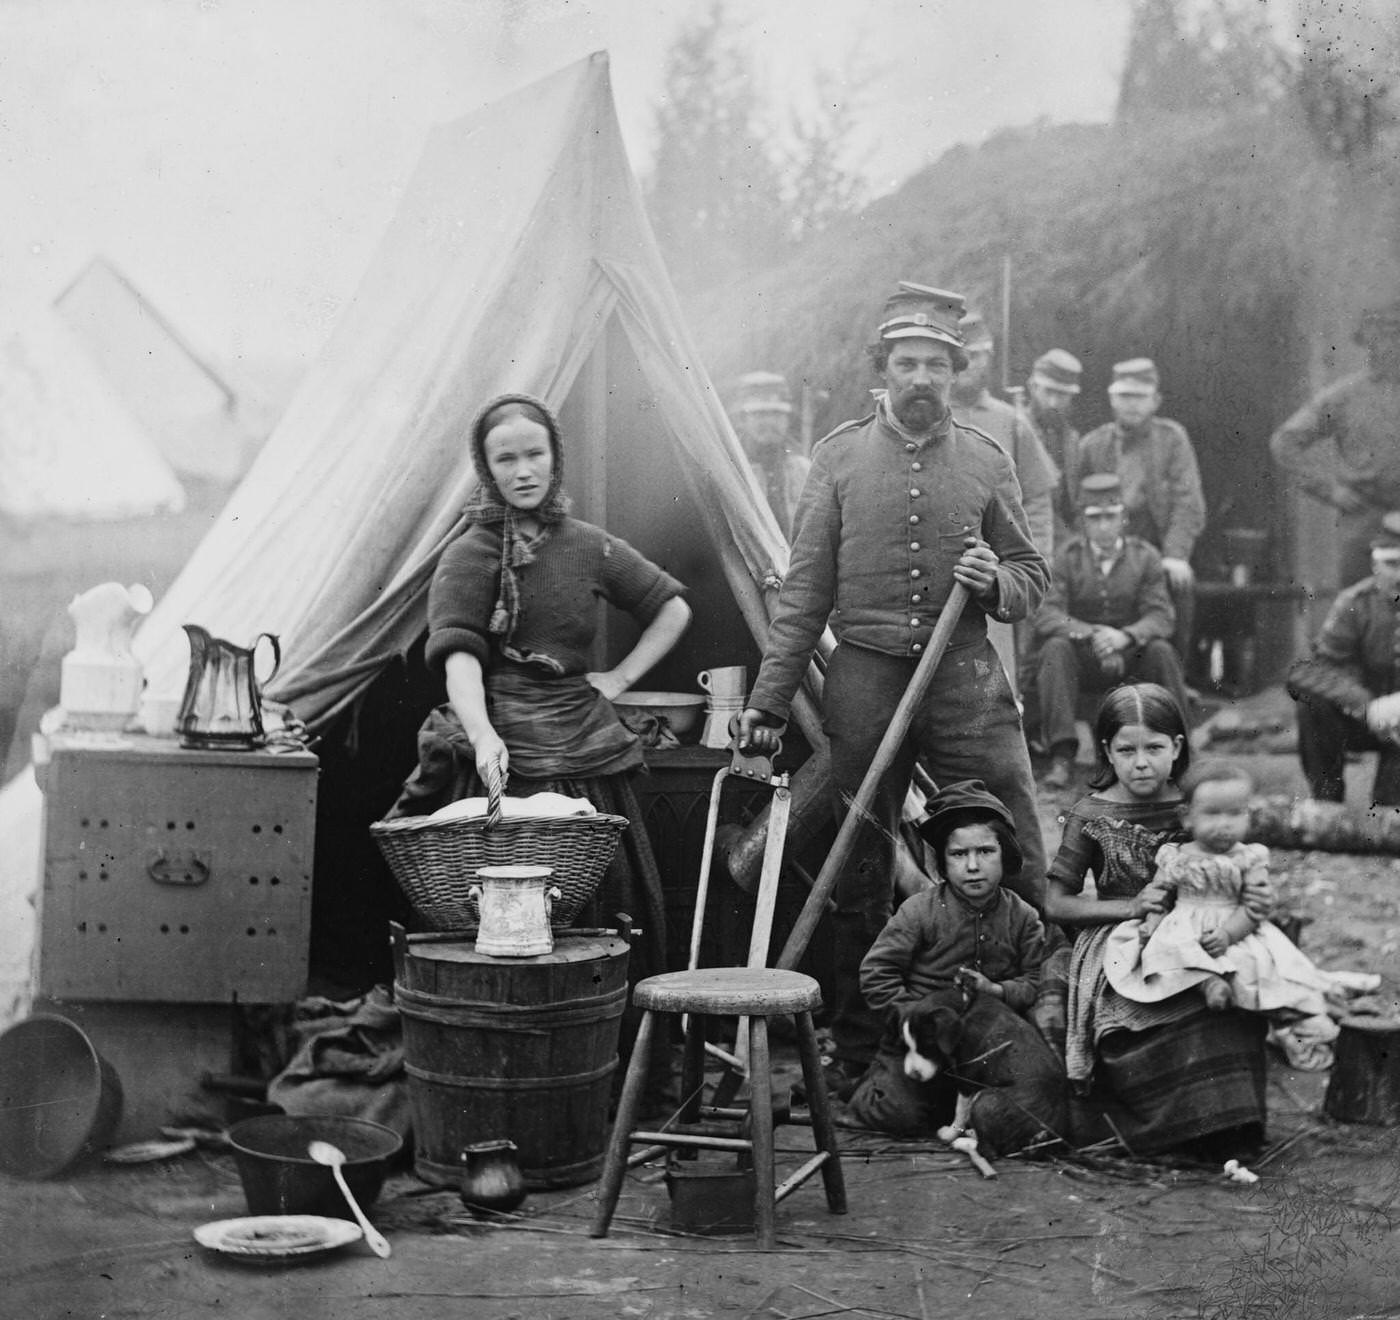 Tent life of the 31st Penn. Inf. (later, 82d Penn. Inf.) at Queen's farm, vicinity of Fort Slocum 1861, War of Secession